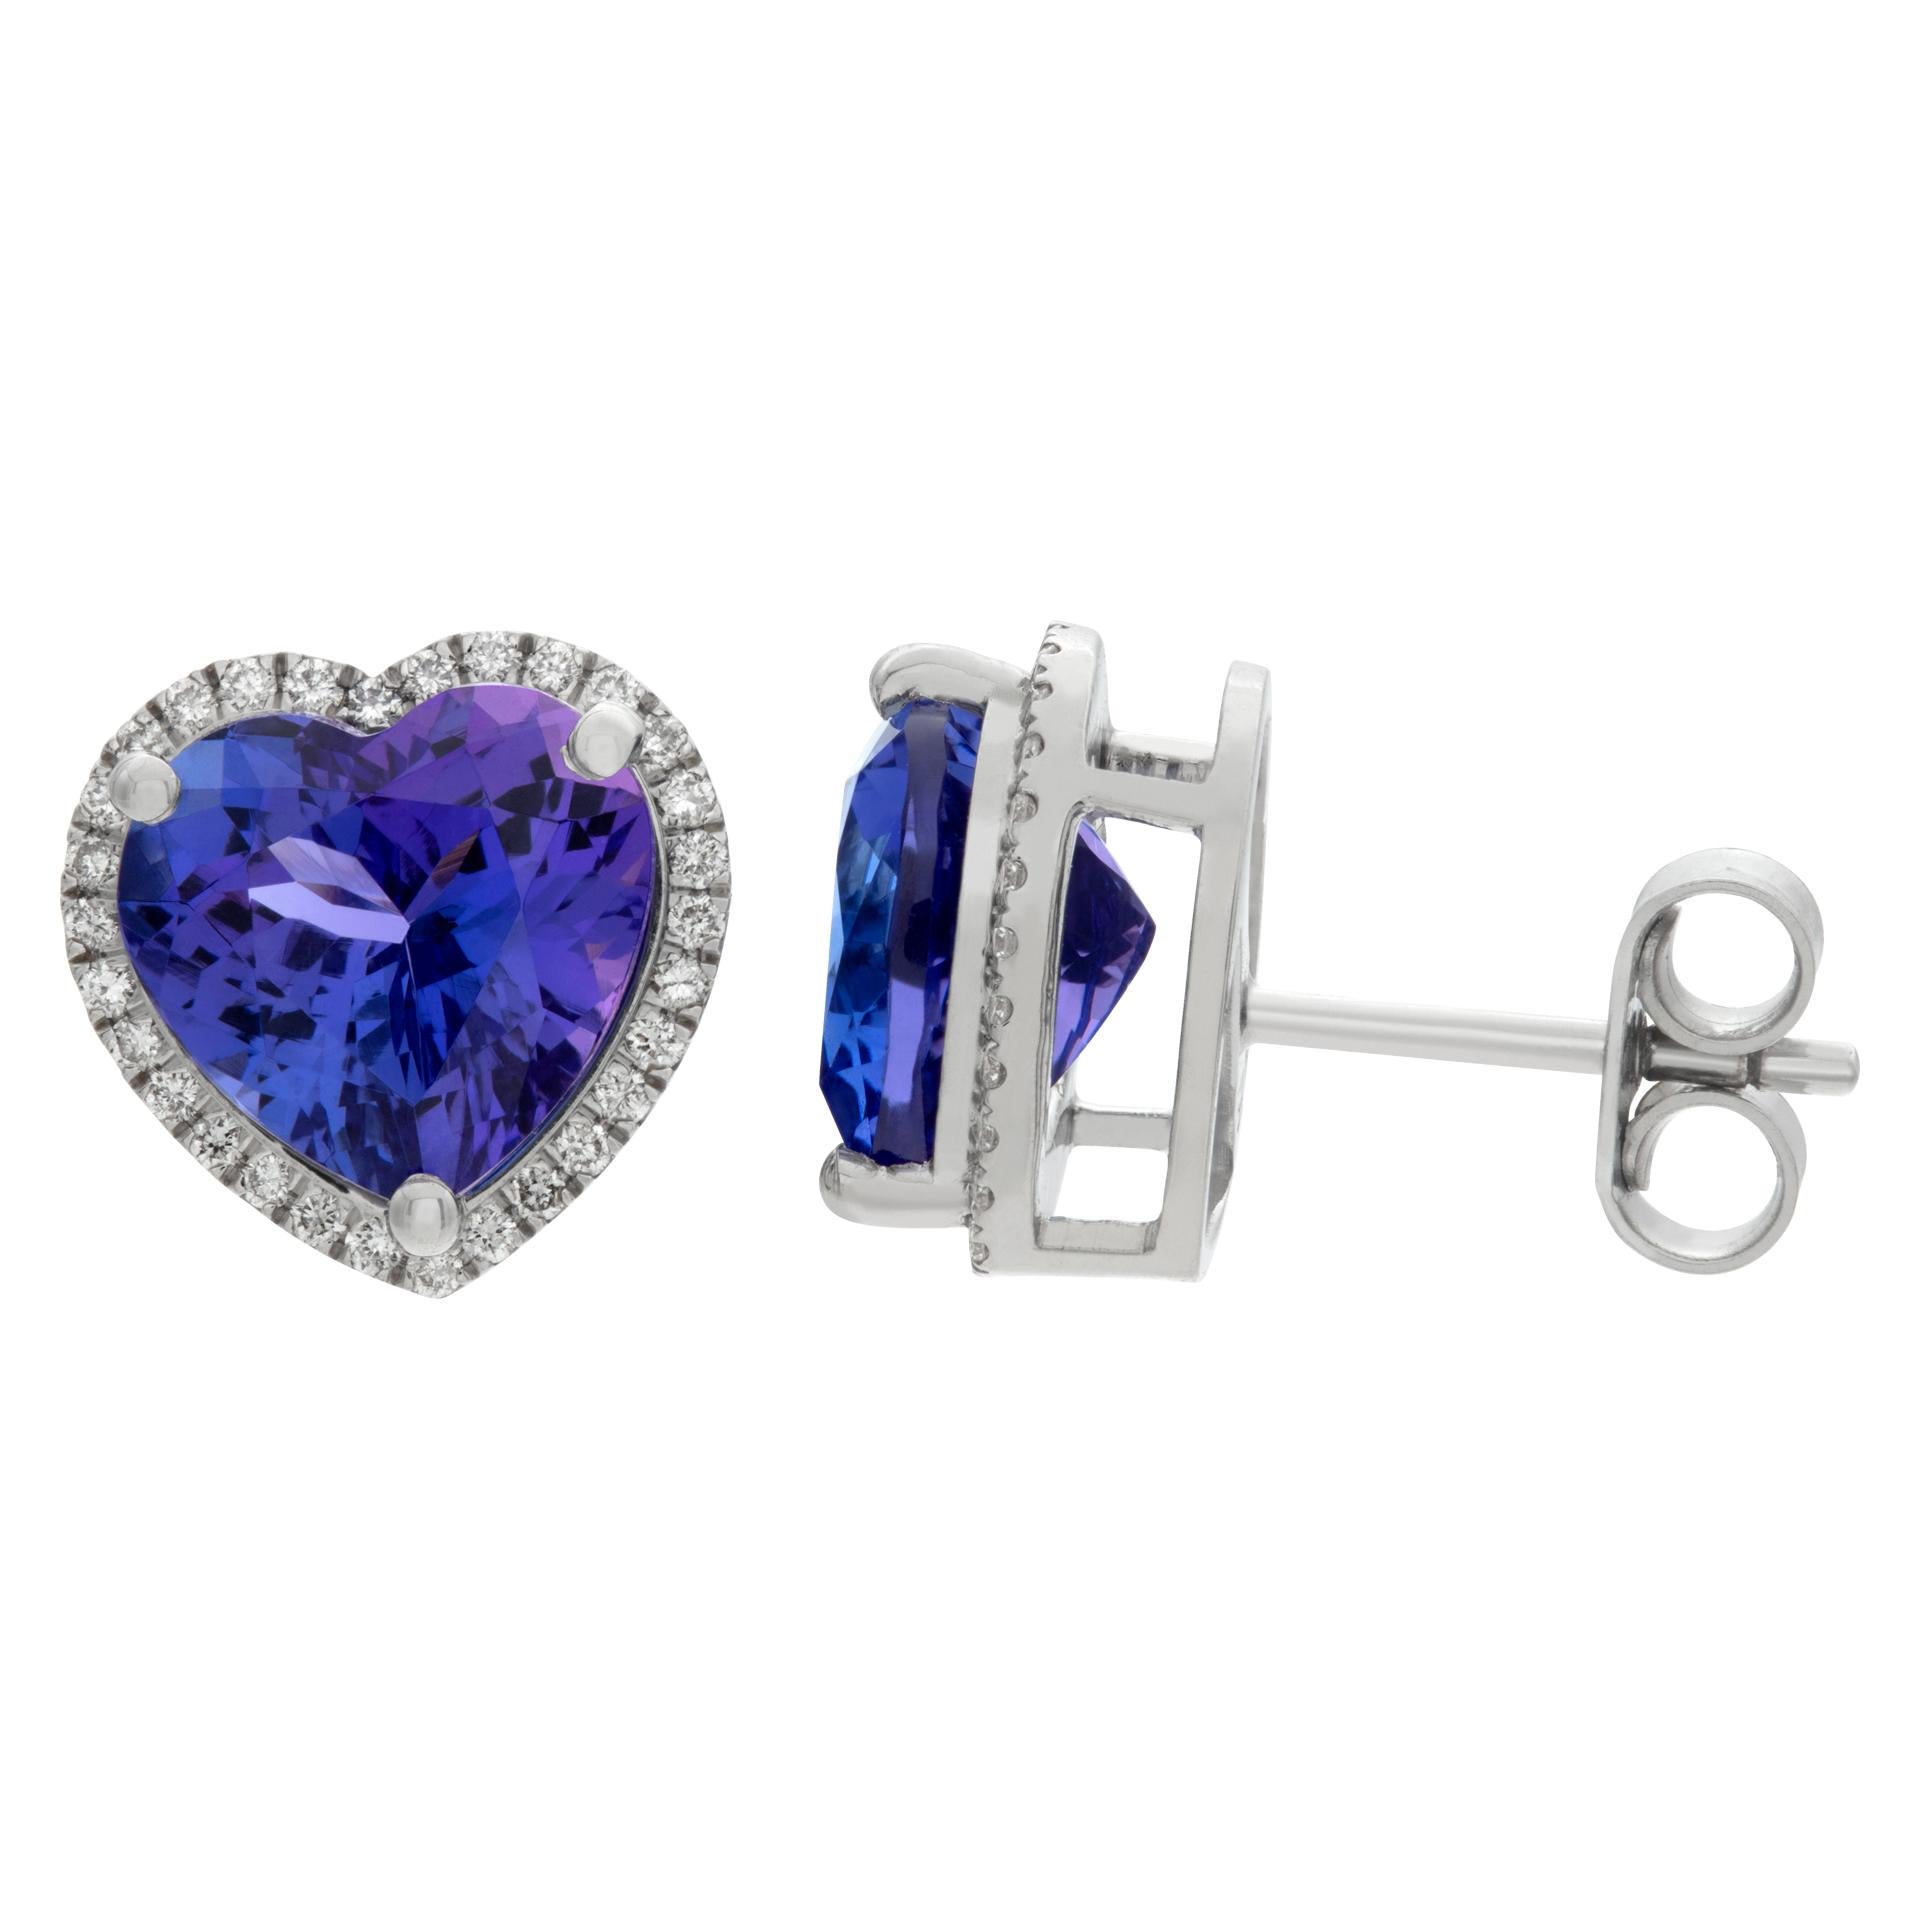 White gold heart tanzanite and diamond stud earrings In Excellent Condition For Sale In Surfside, FL